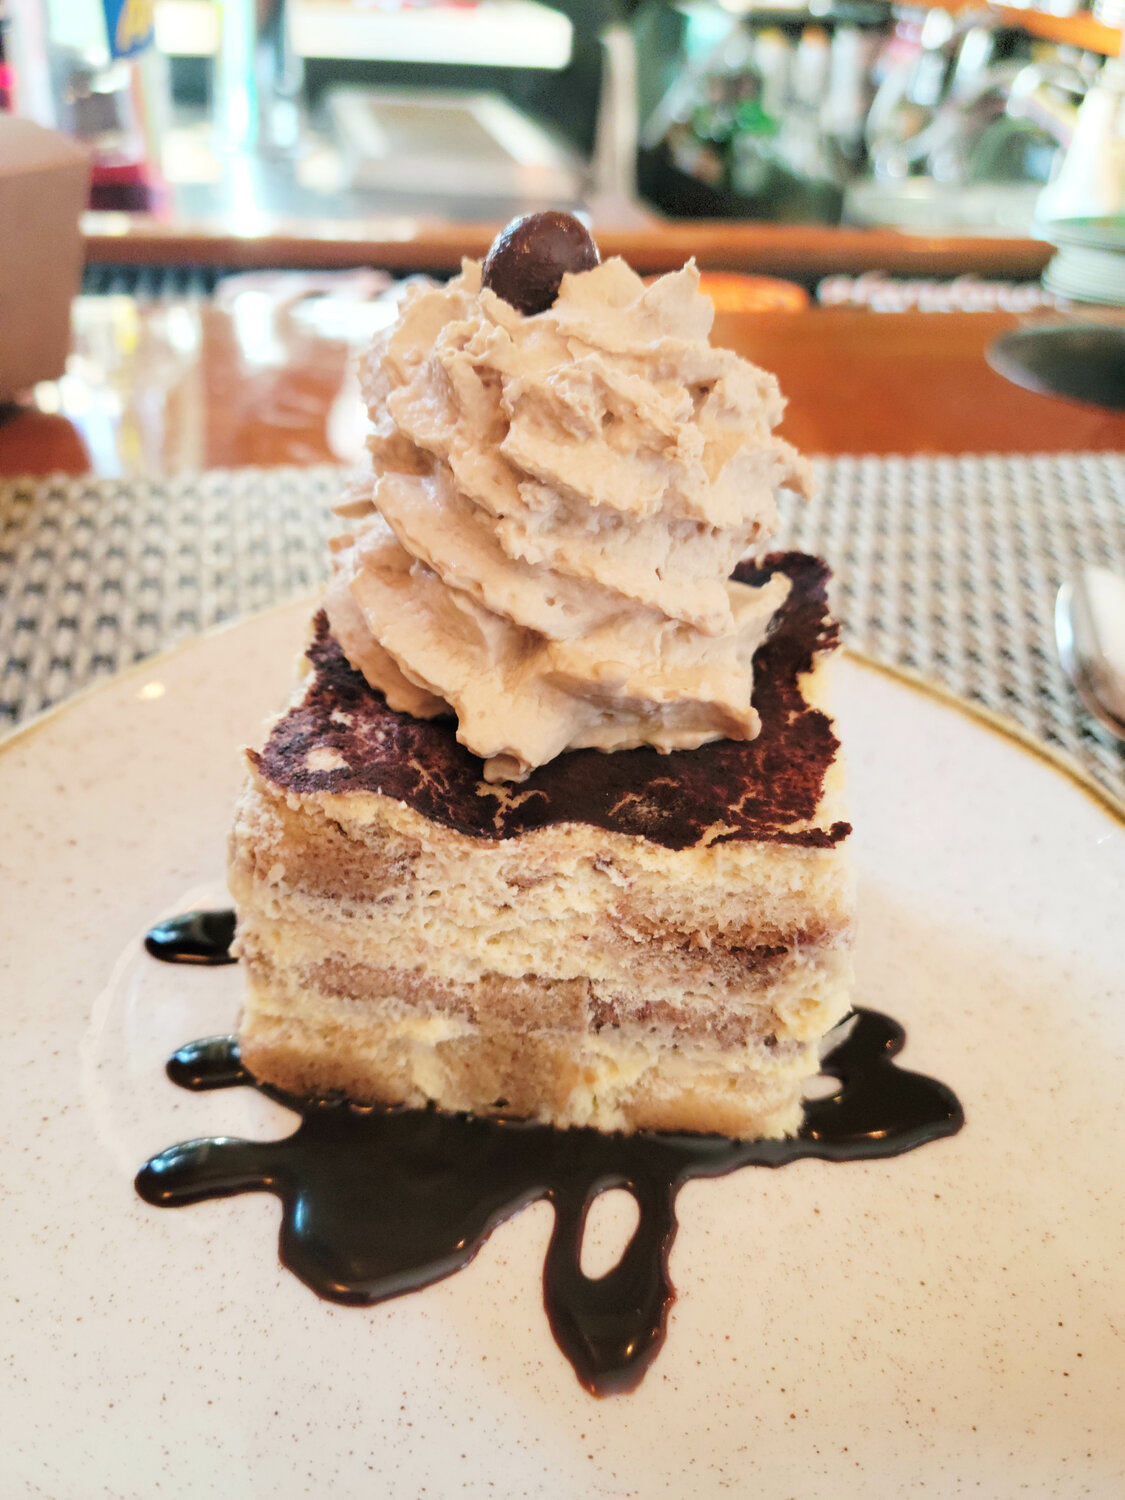 There’s always room for a dessert of decadent tiramisu at Fusaro’s.